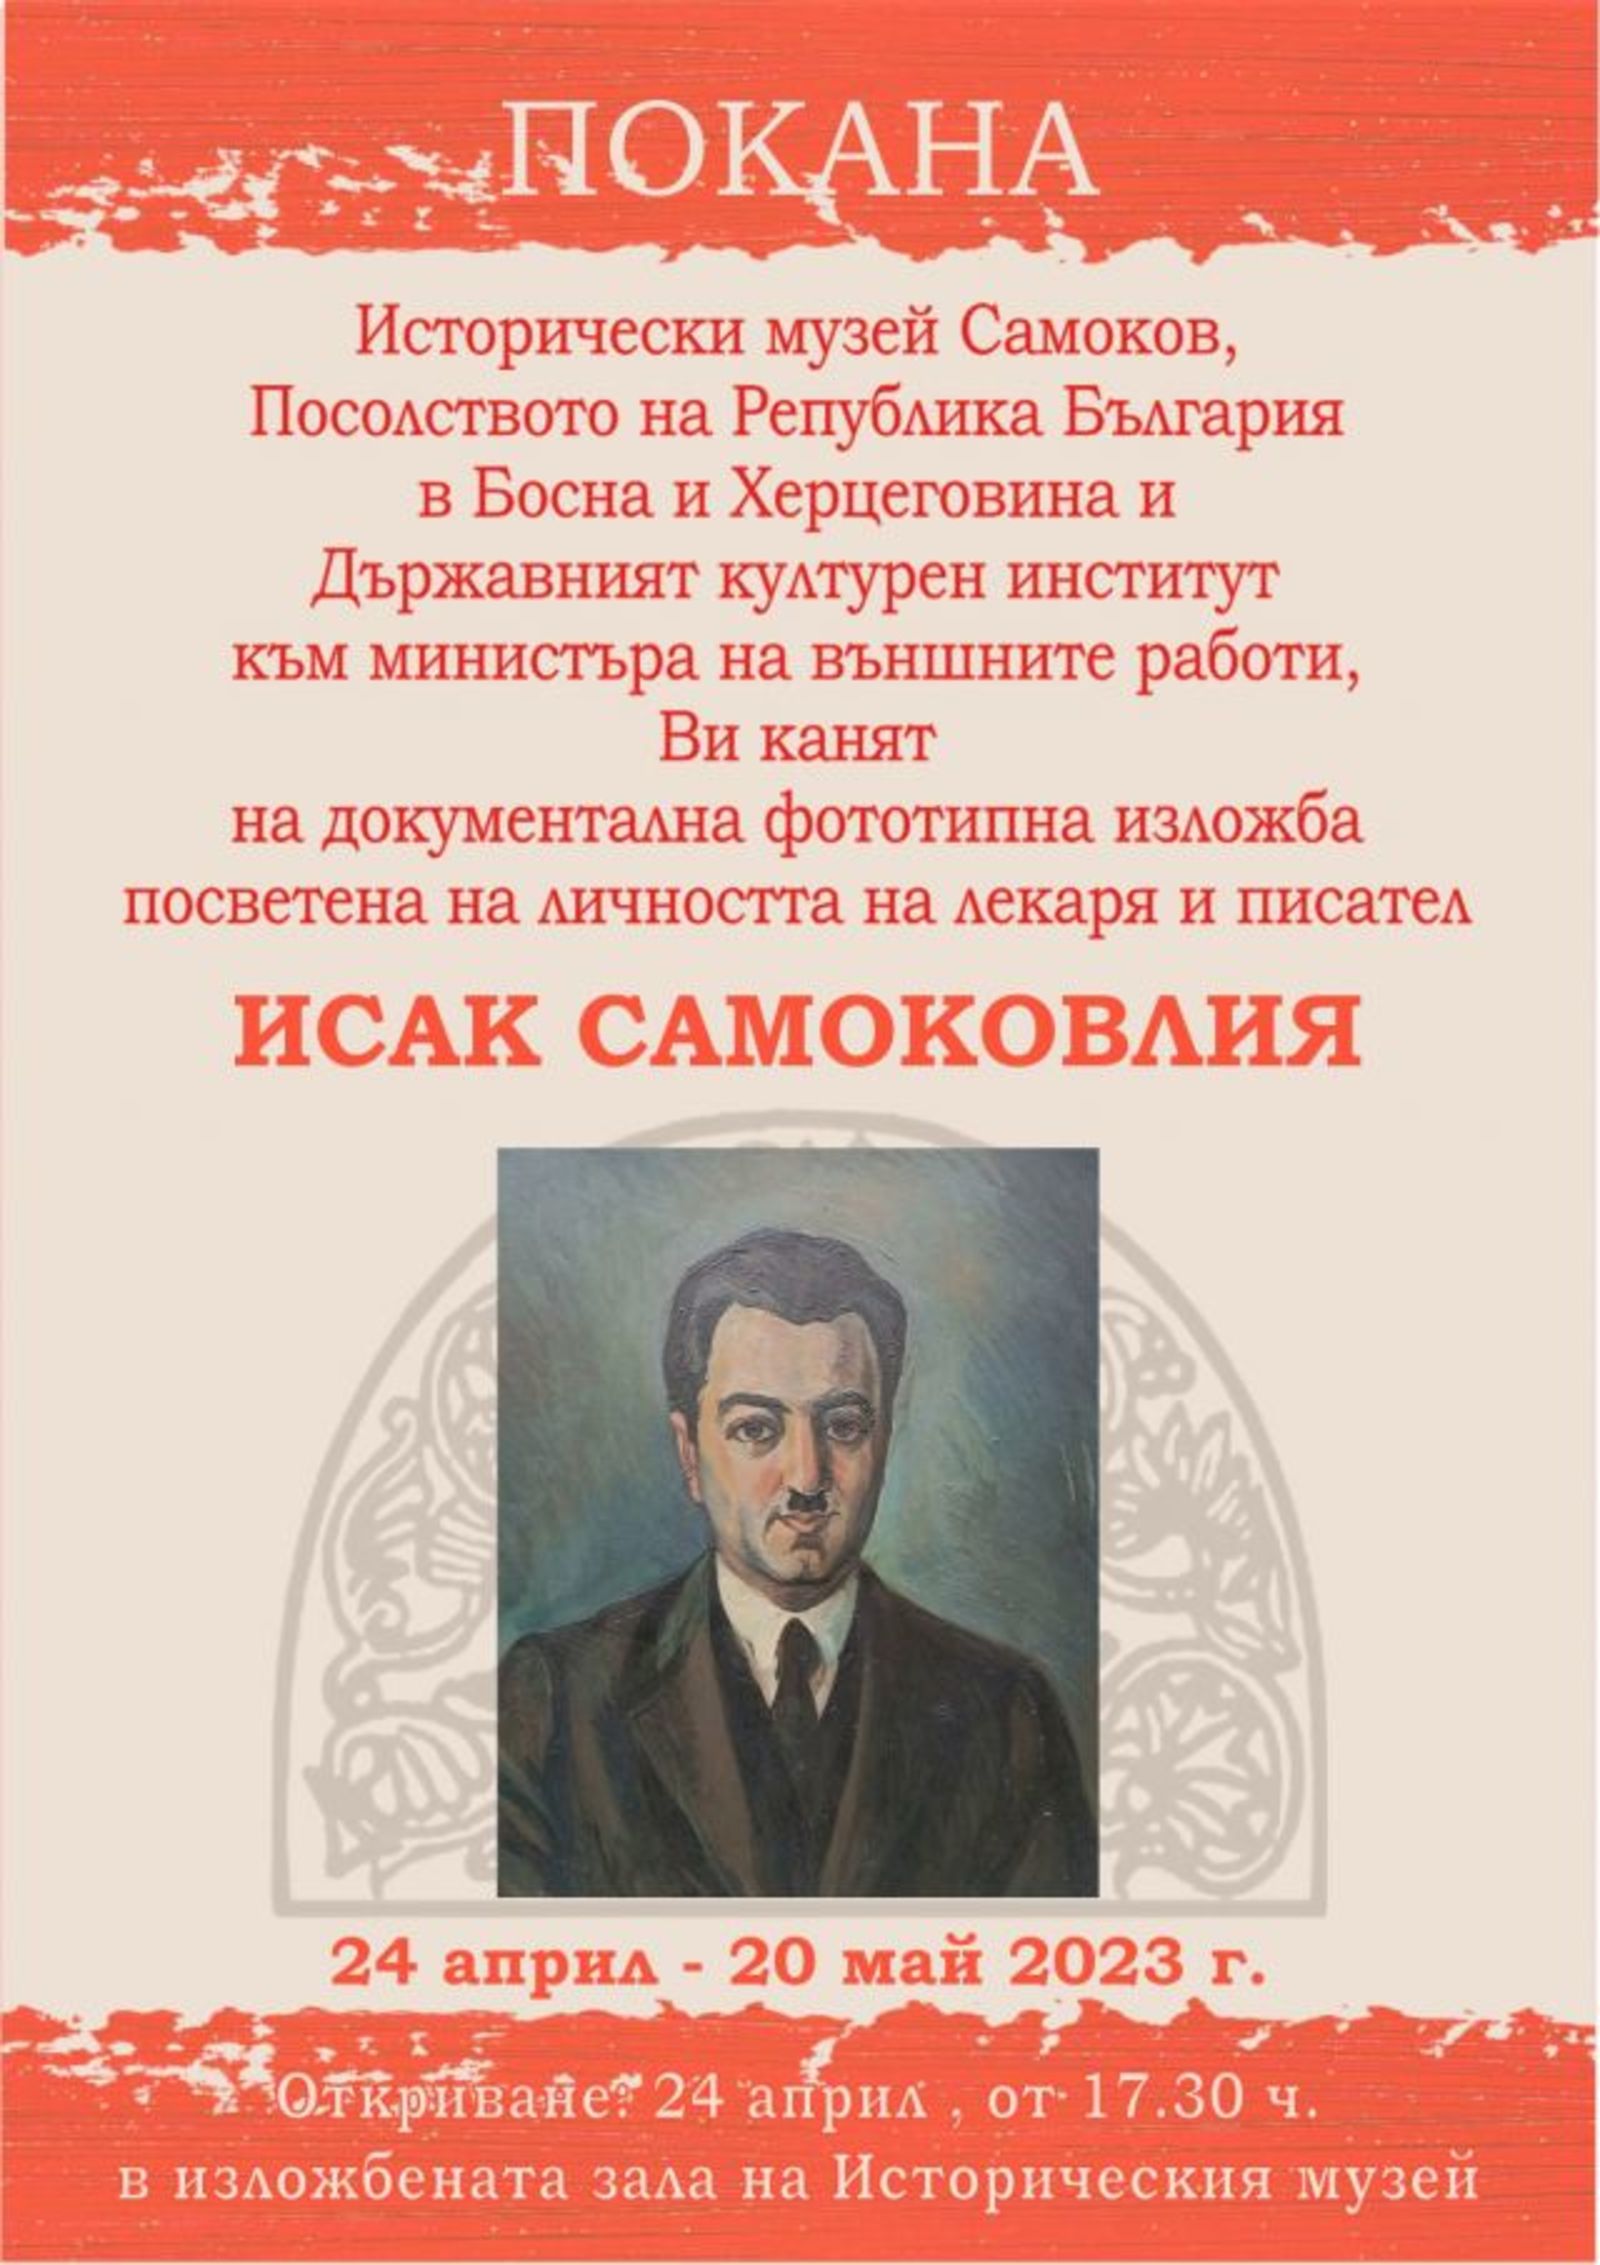 A Phototype Exhibition about the Famous Bosnian Writer Isak Samokovlia will be Presented in Samokov